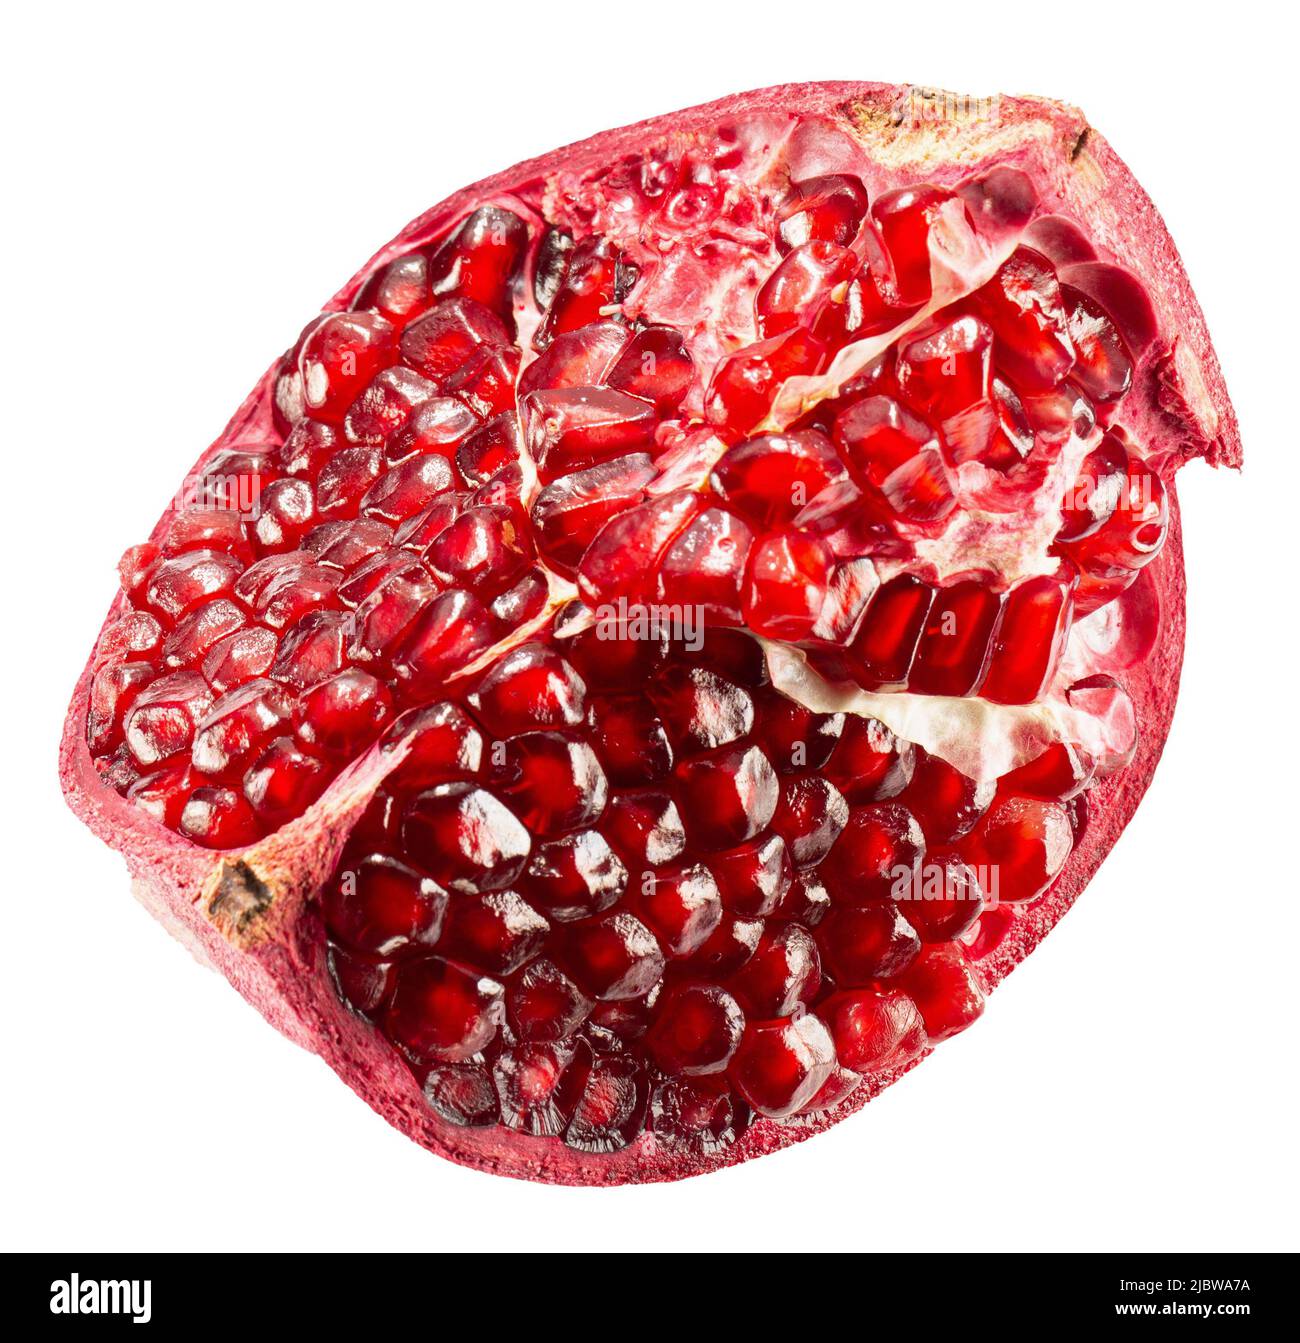 pomegranate slice with red seeds isolated on a white background with clipping path. Stock Photo